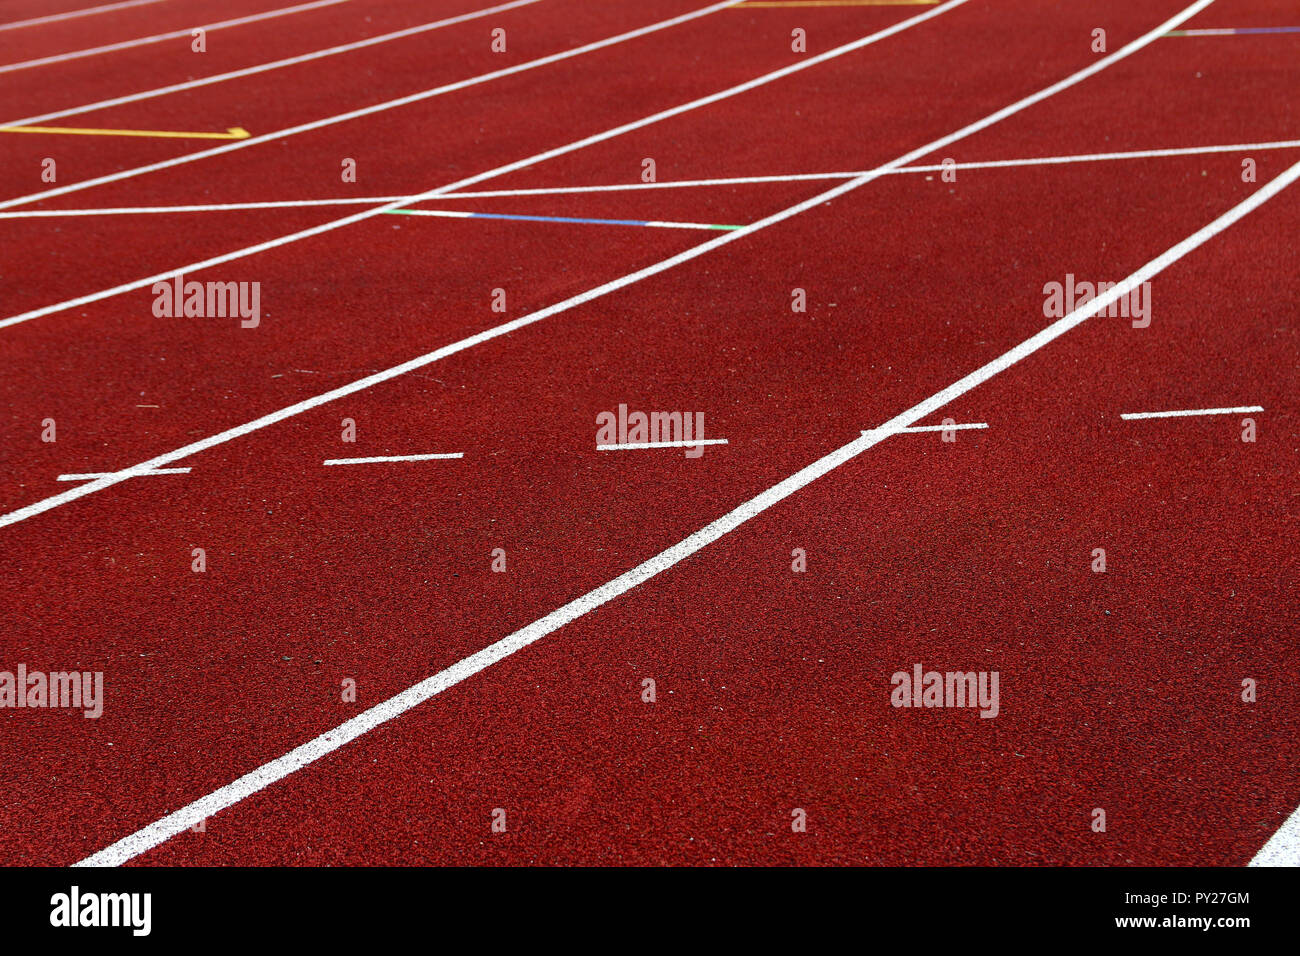 White lines to mark the lanes on an outdoor ahtletic track Stock Photo